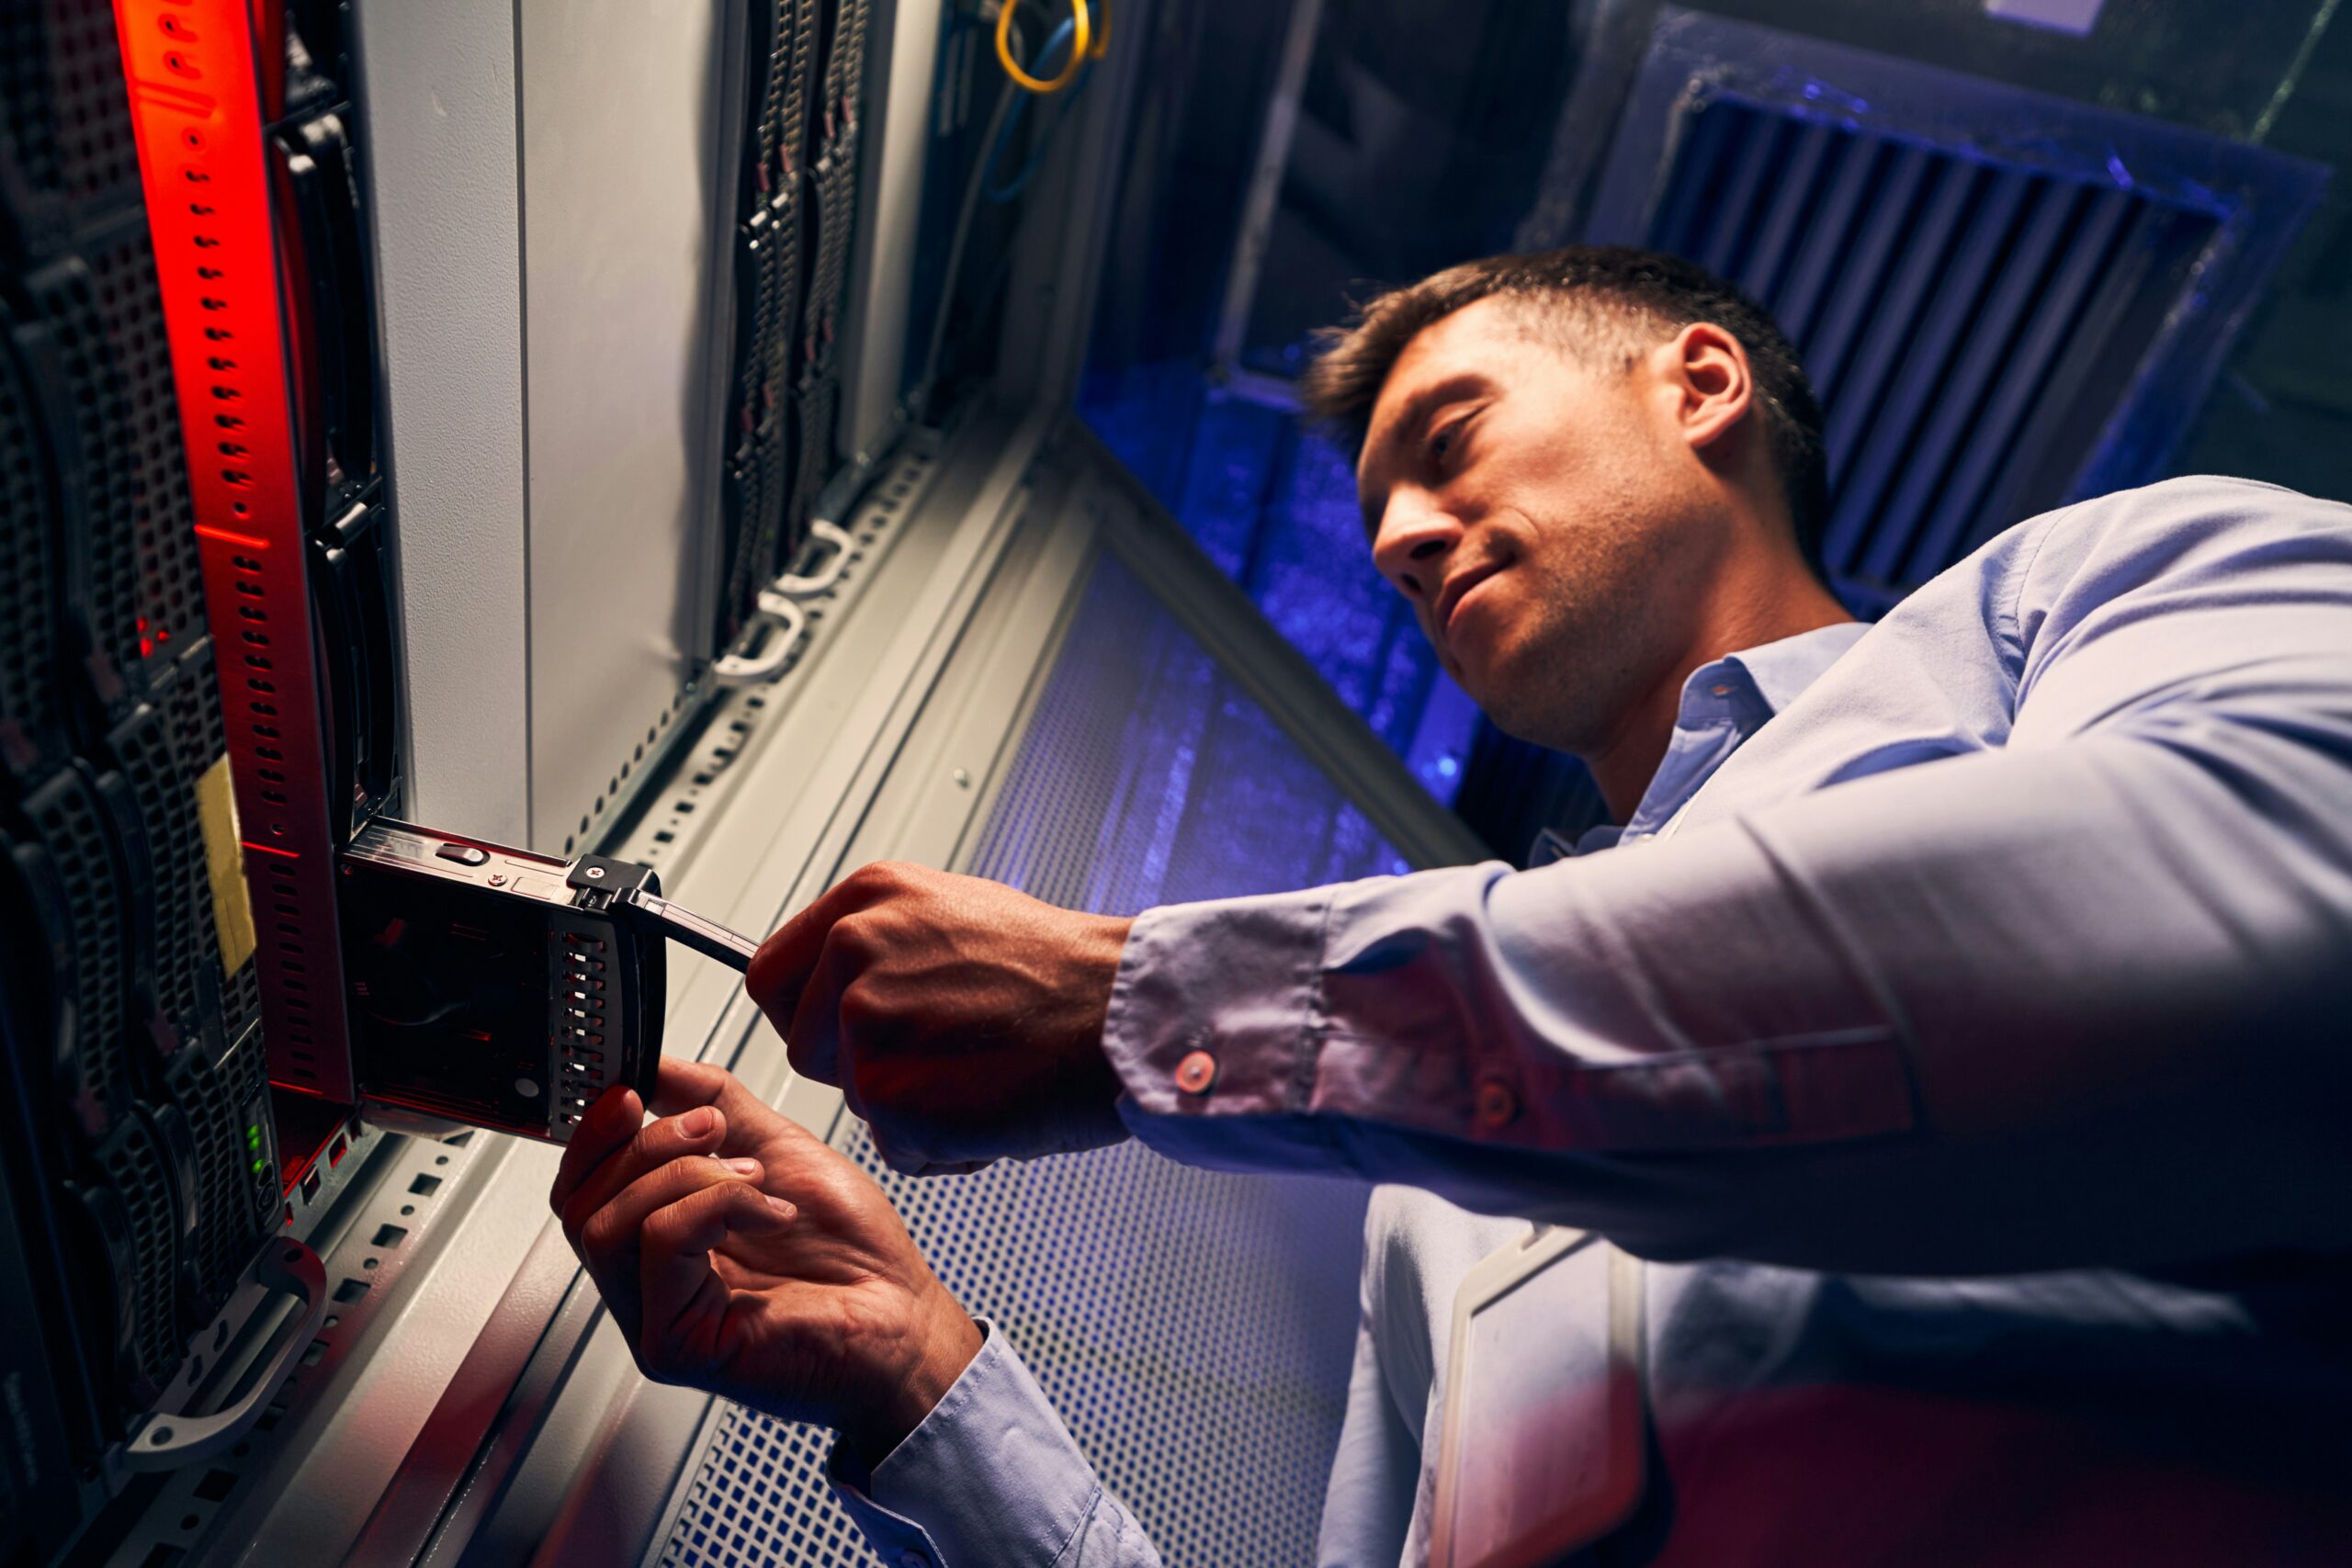 A technician working on server hardware in an IT managed services company's data center.